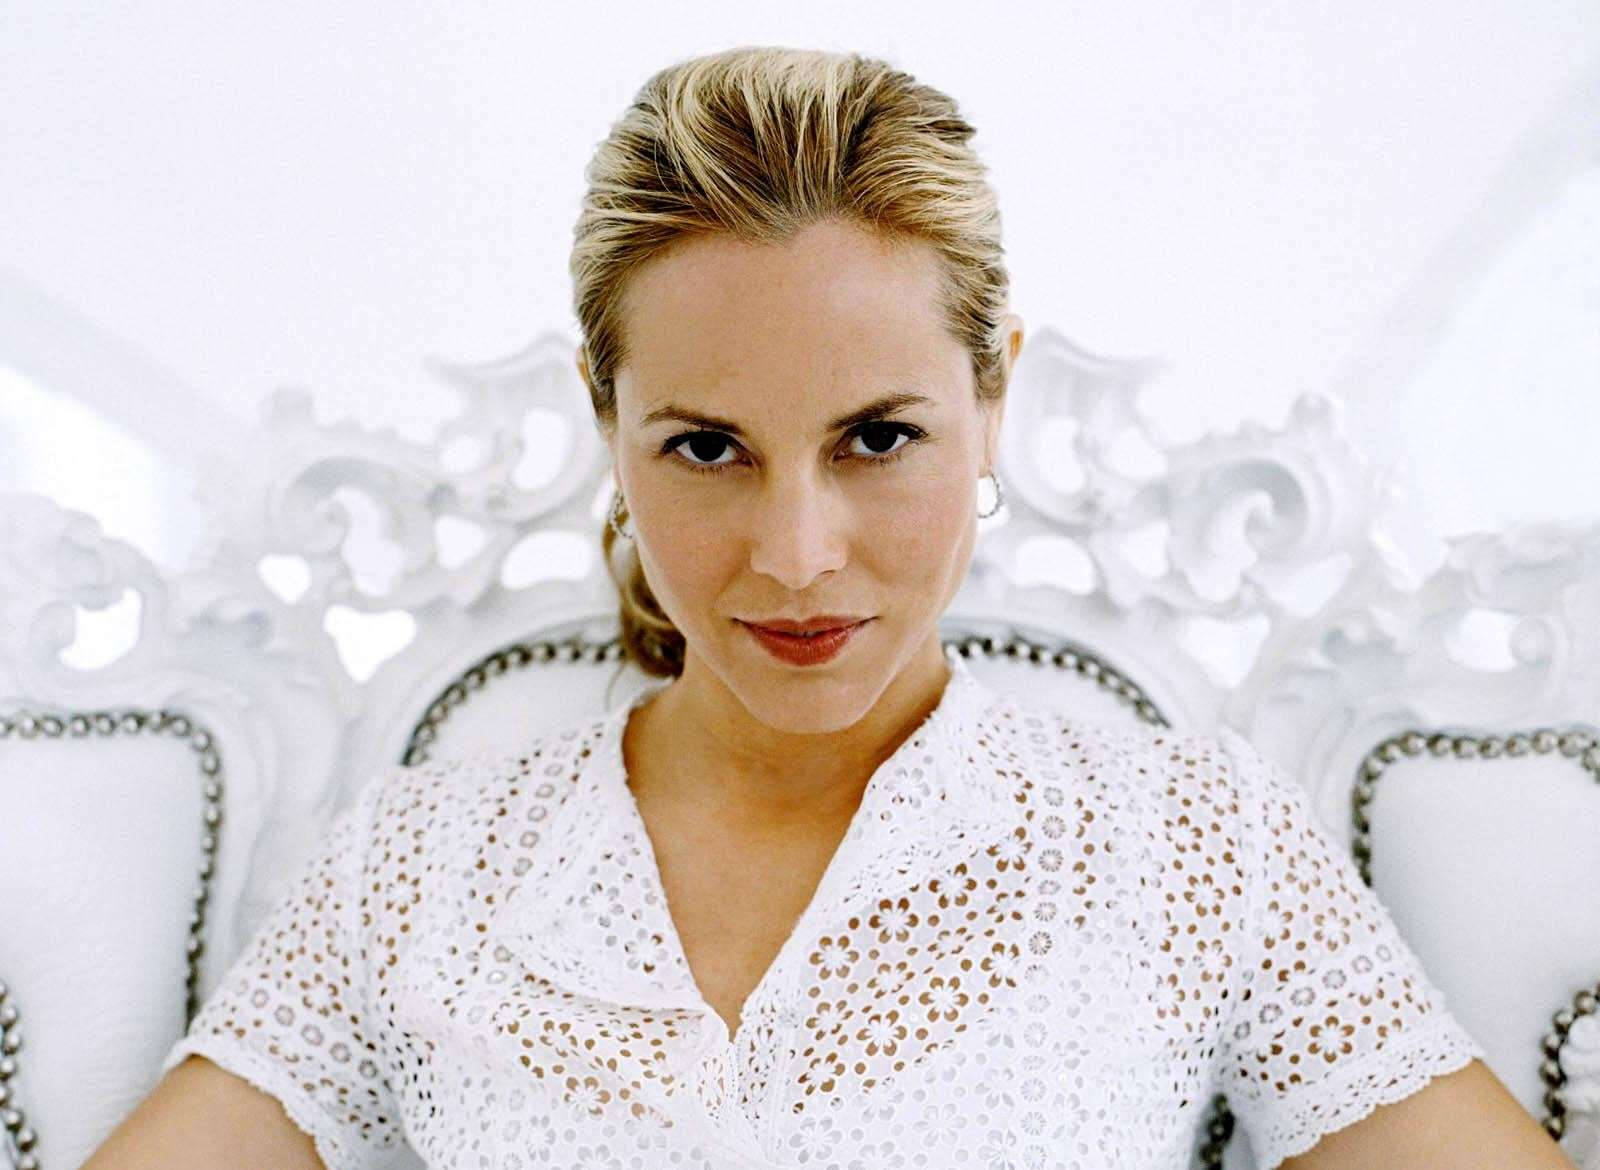 "Maria Bello Exudes Elegance in a Simple White Dress" Wallpaper